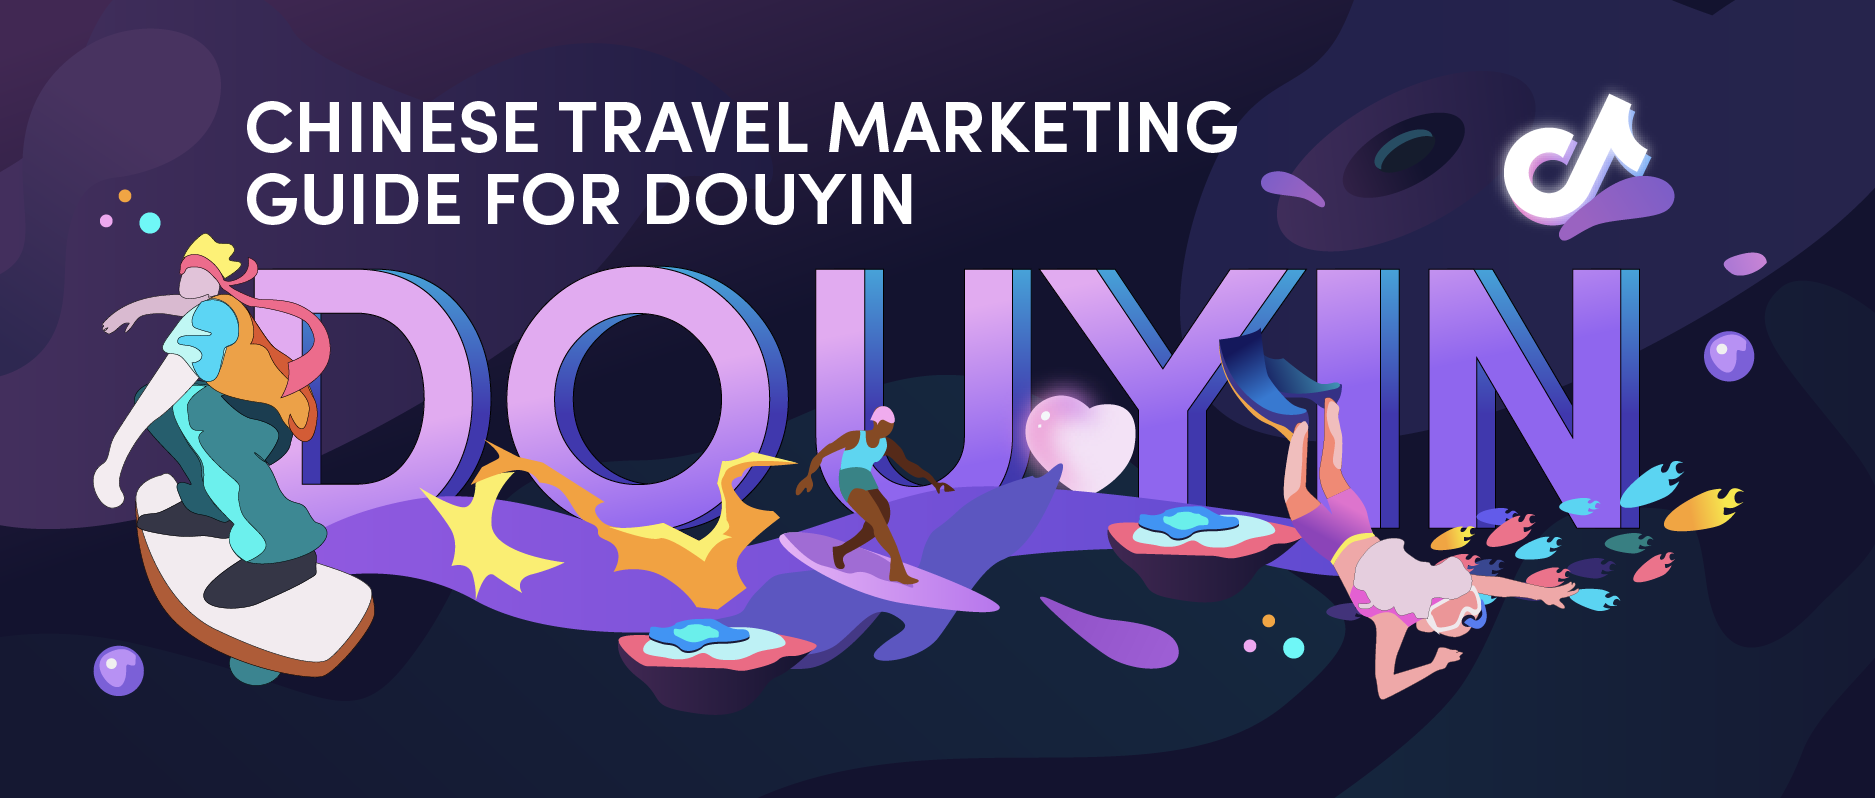 Chinese Travel Marketing Guide for Douyin